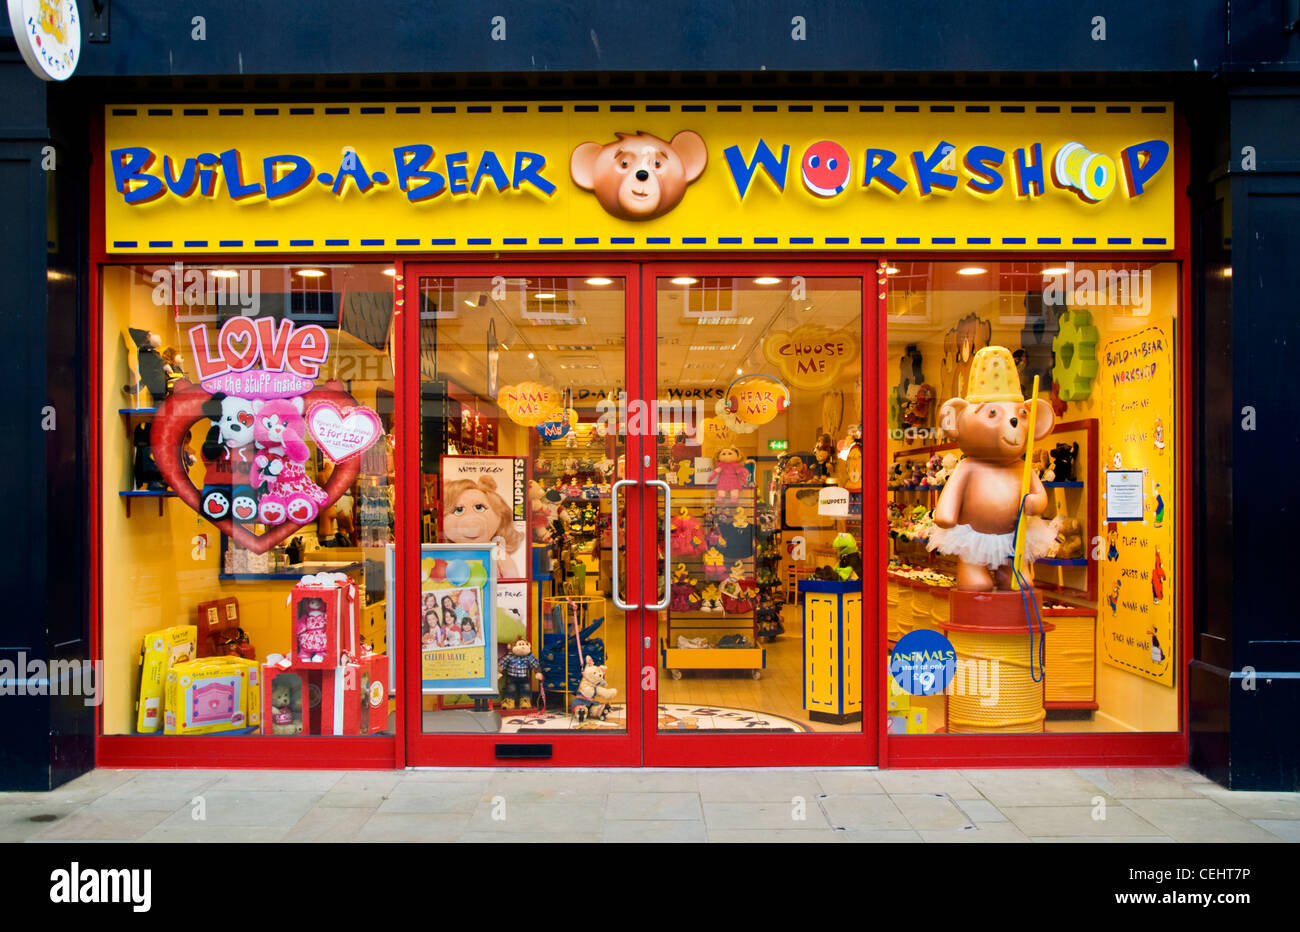 Build A Bear Workshop childrens store shop in city centre Stock Photo